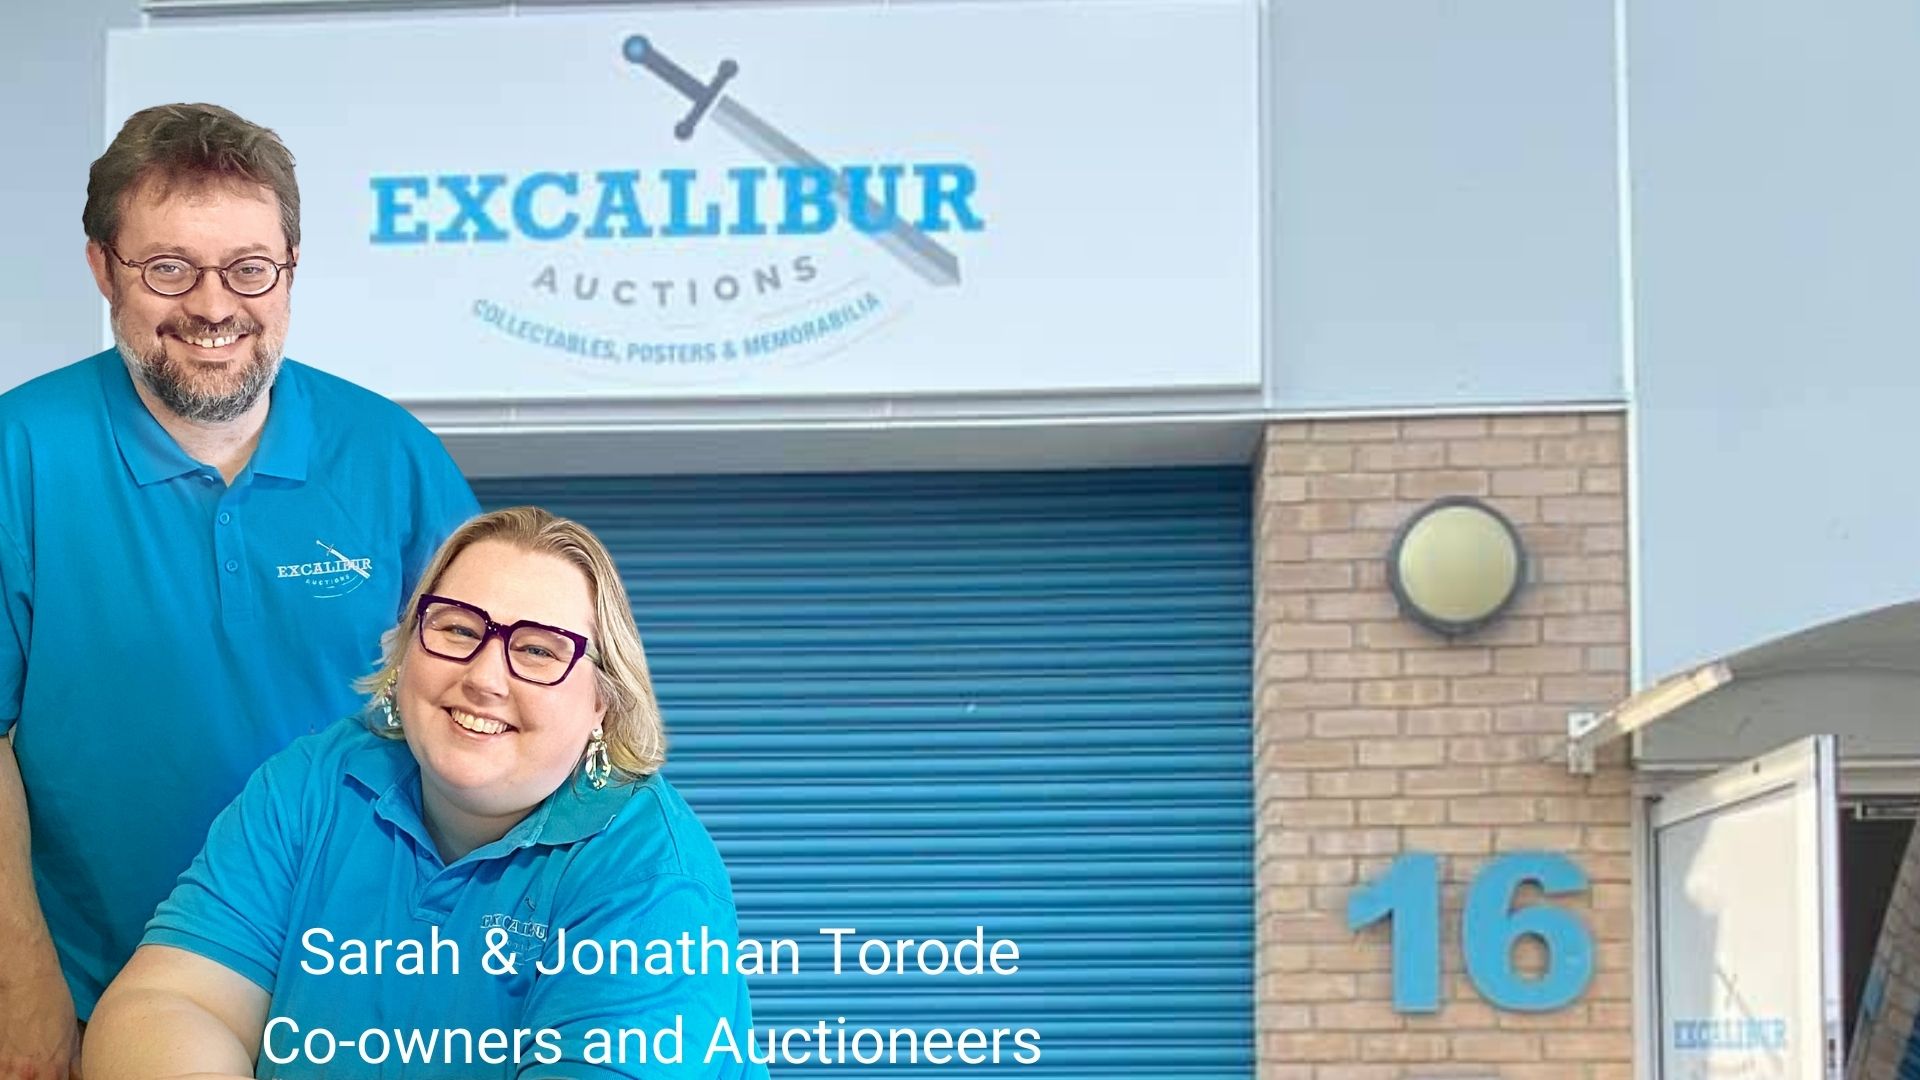 Who and What are Excalibur Auctions?